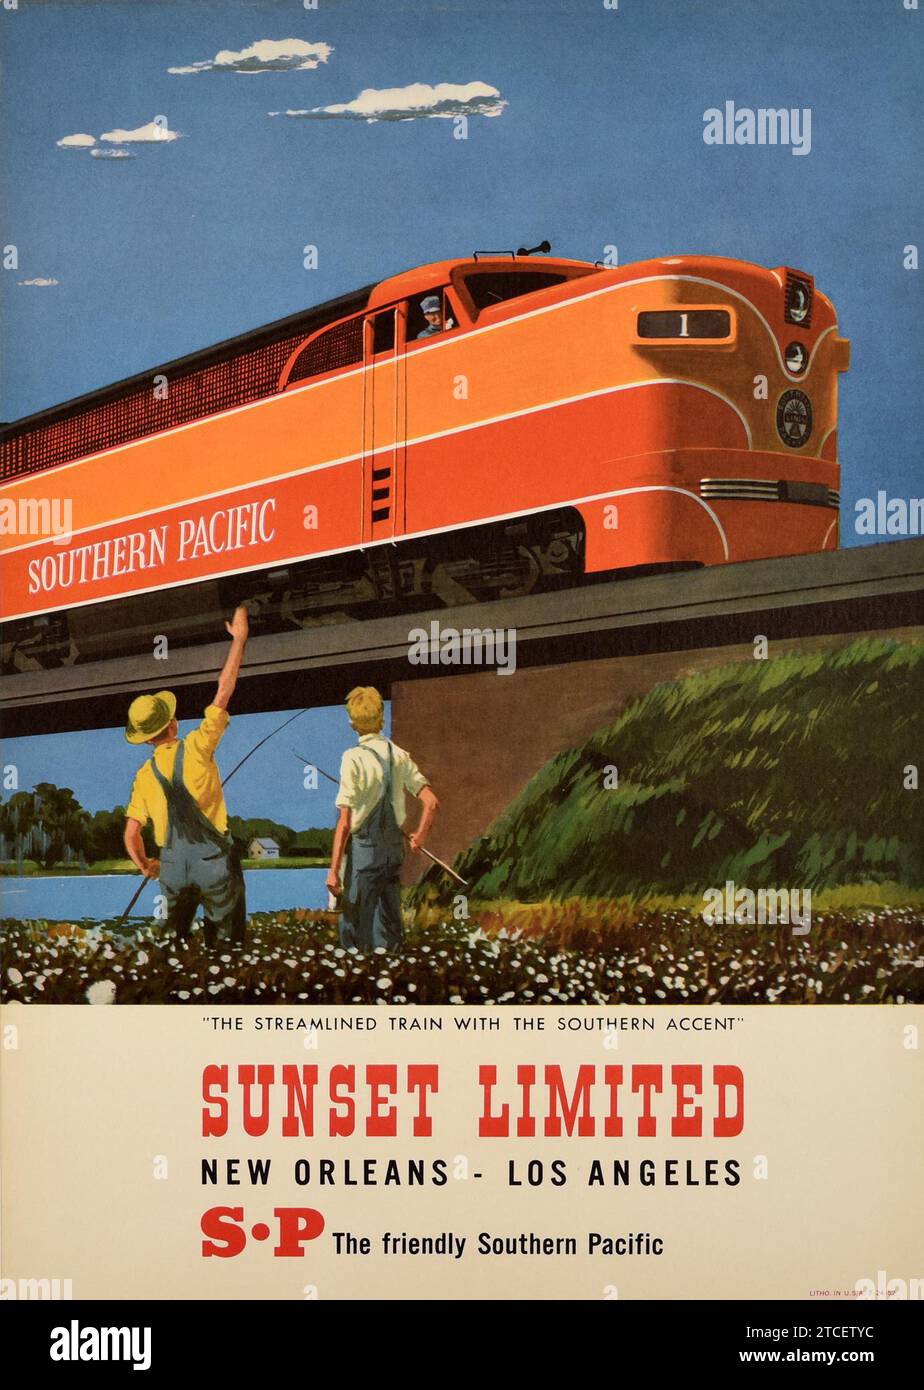 Vintage-Reiseposter - Sunset Limited Railroad Southern Pacific Railway, New Orleans-Los Angeles - 1952 Stockfoto